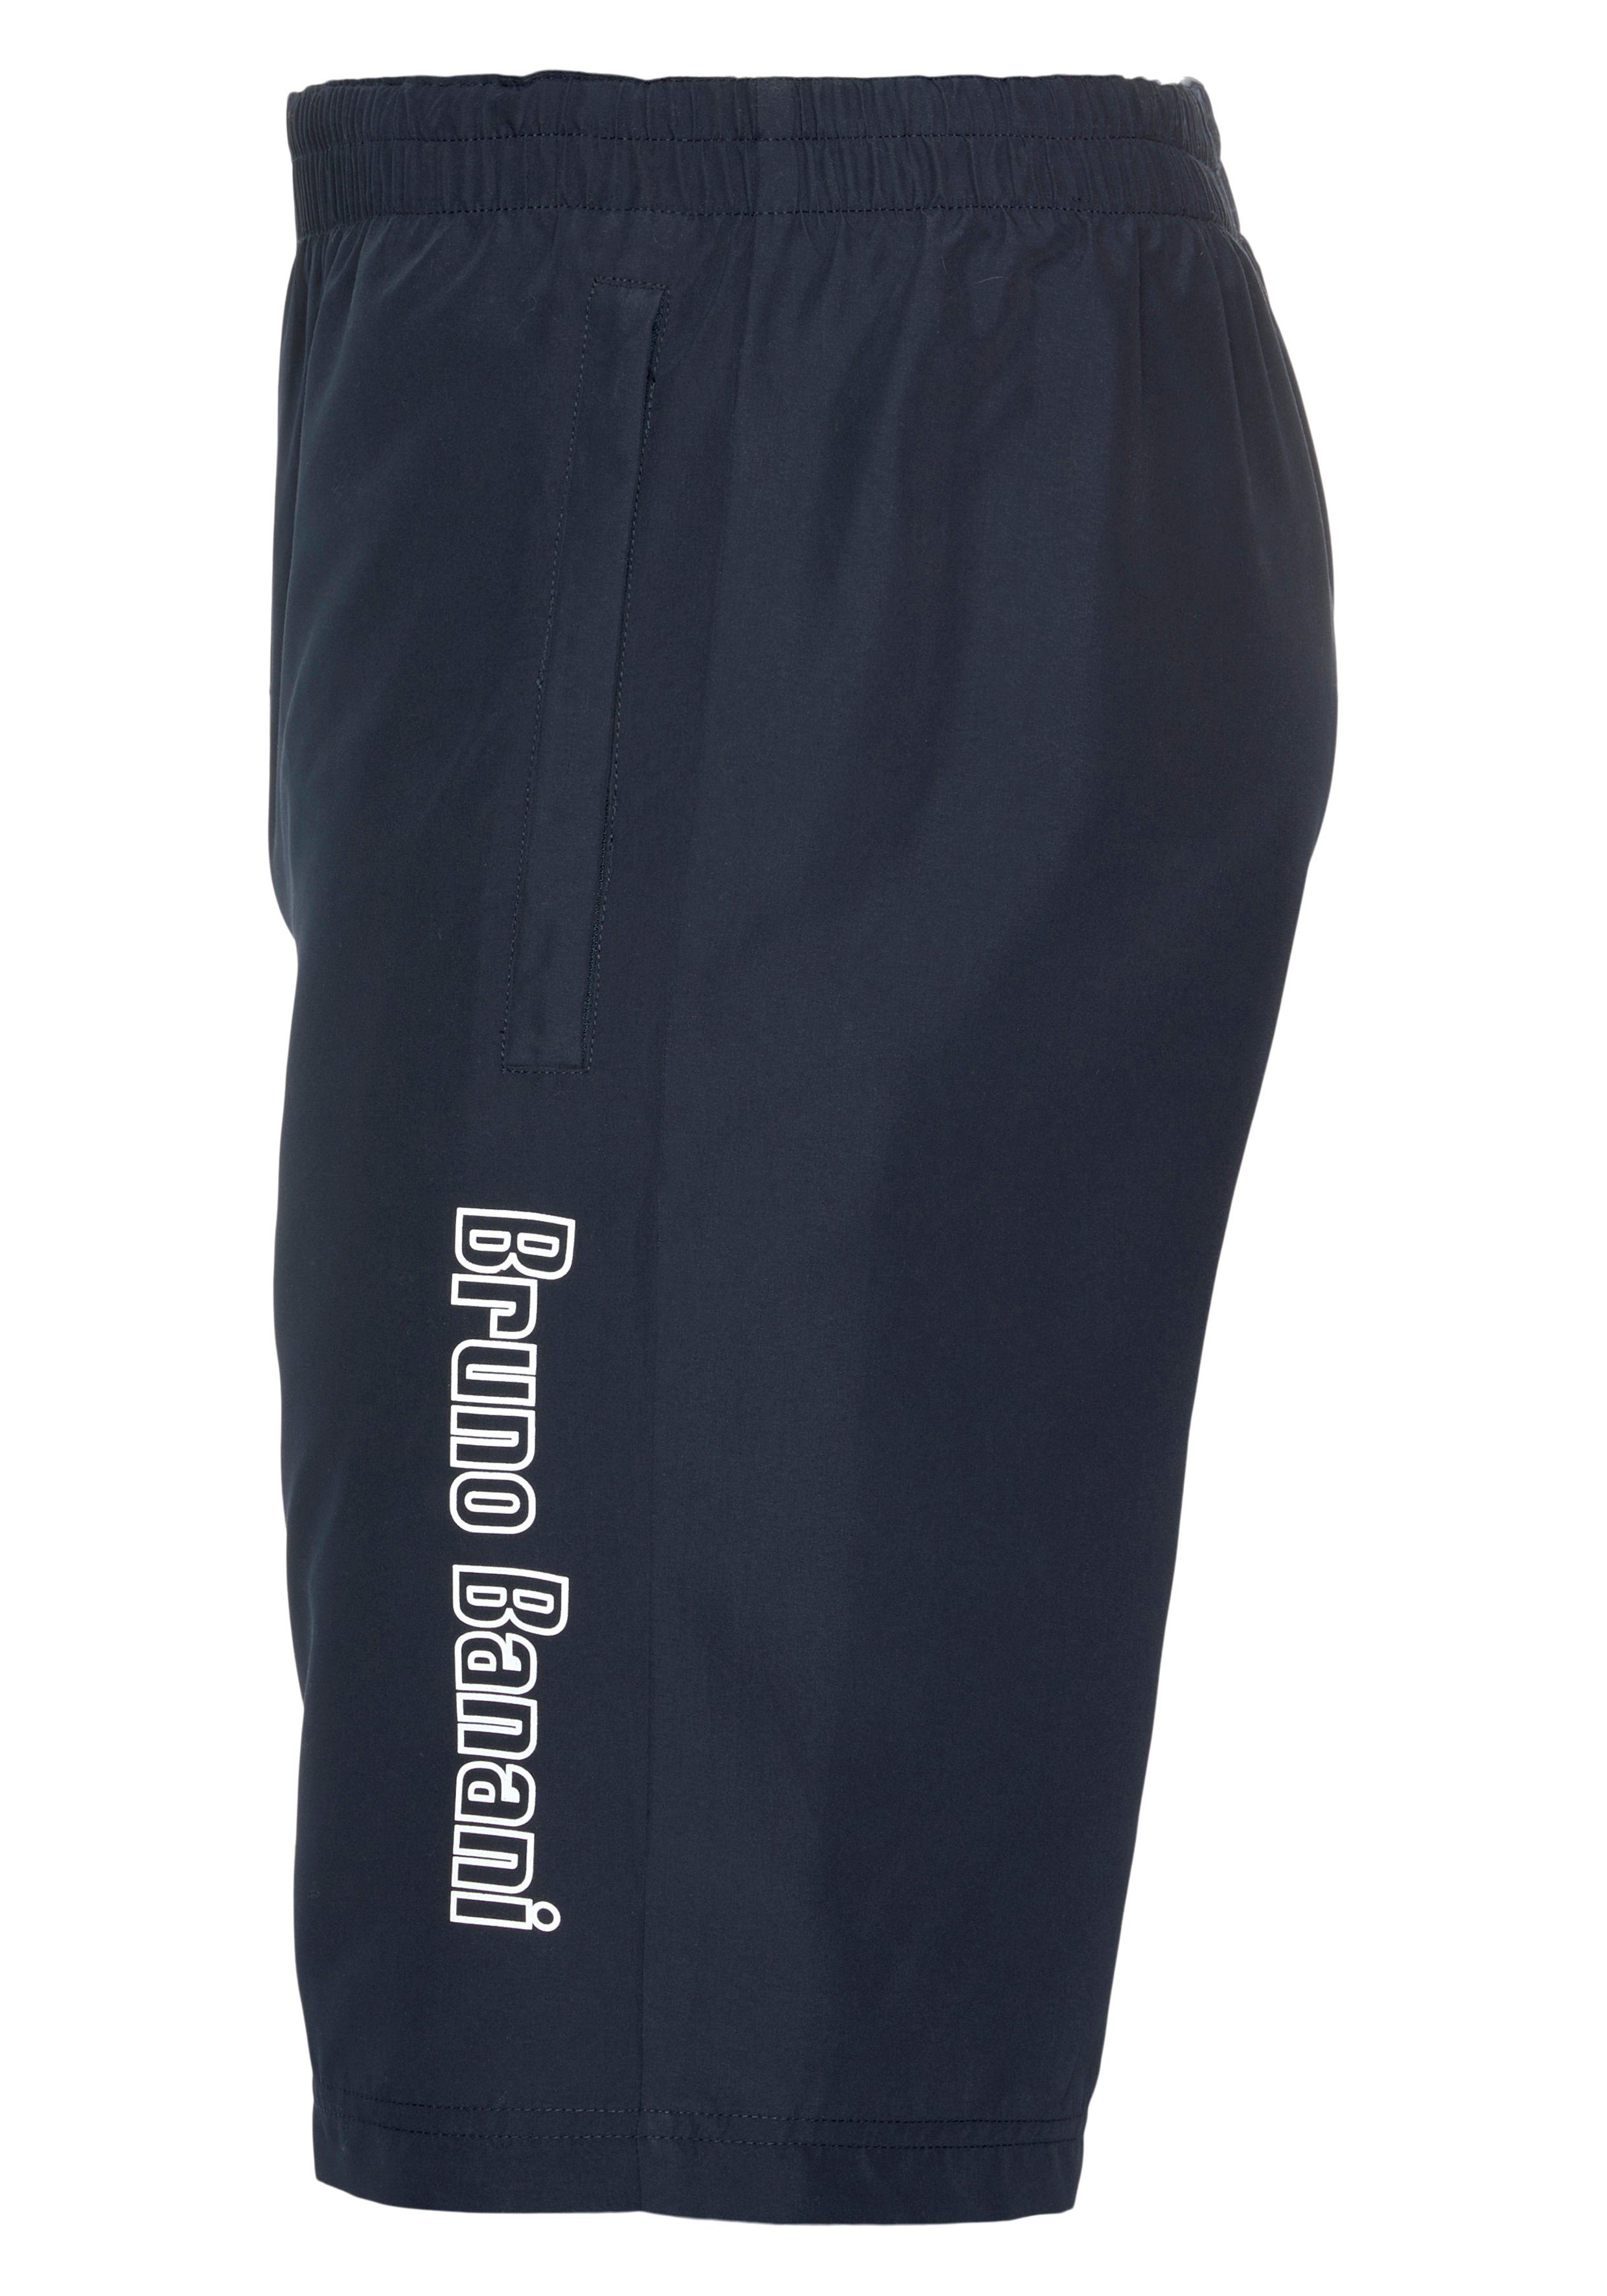 Material Bruno Navy recyceltem Funktionsshorts aus Banani